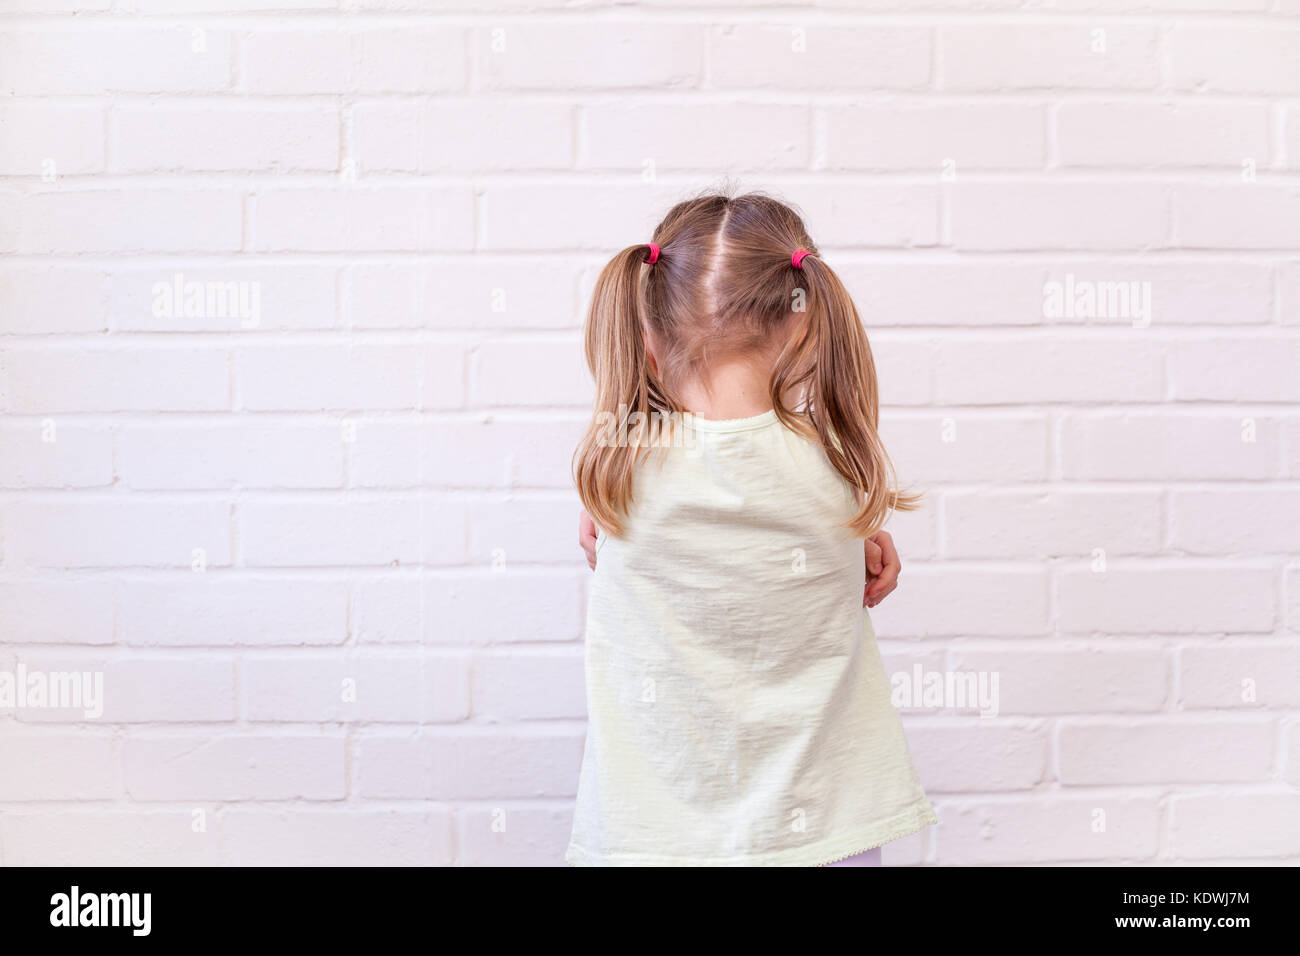 Female child with back to viewer and arms folded in grumpy or sad pose against white brick wall. Emotional or unhappy kid concept Stock Photo